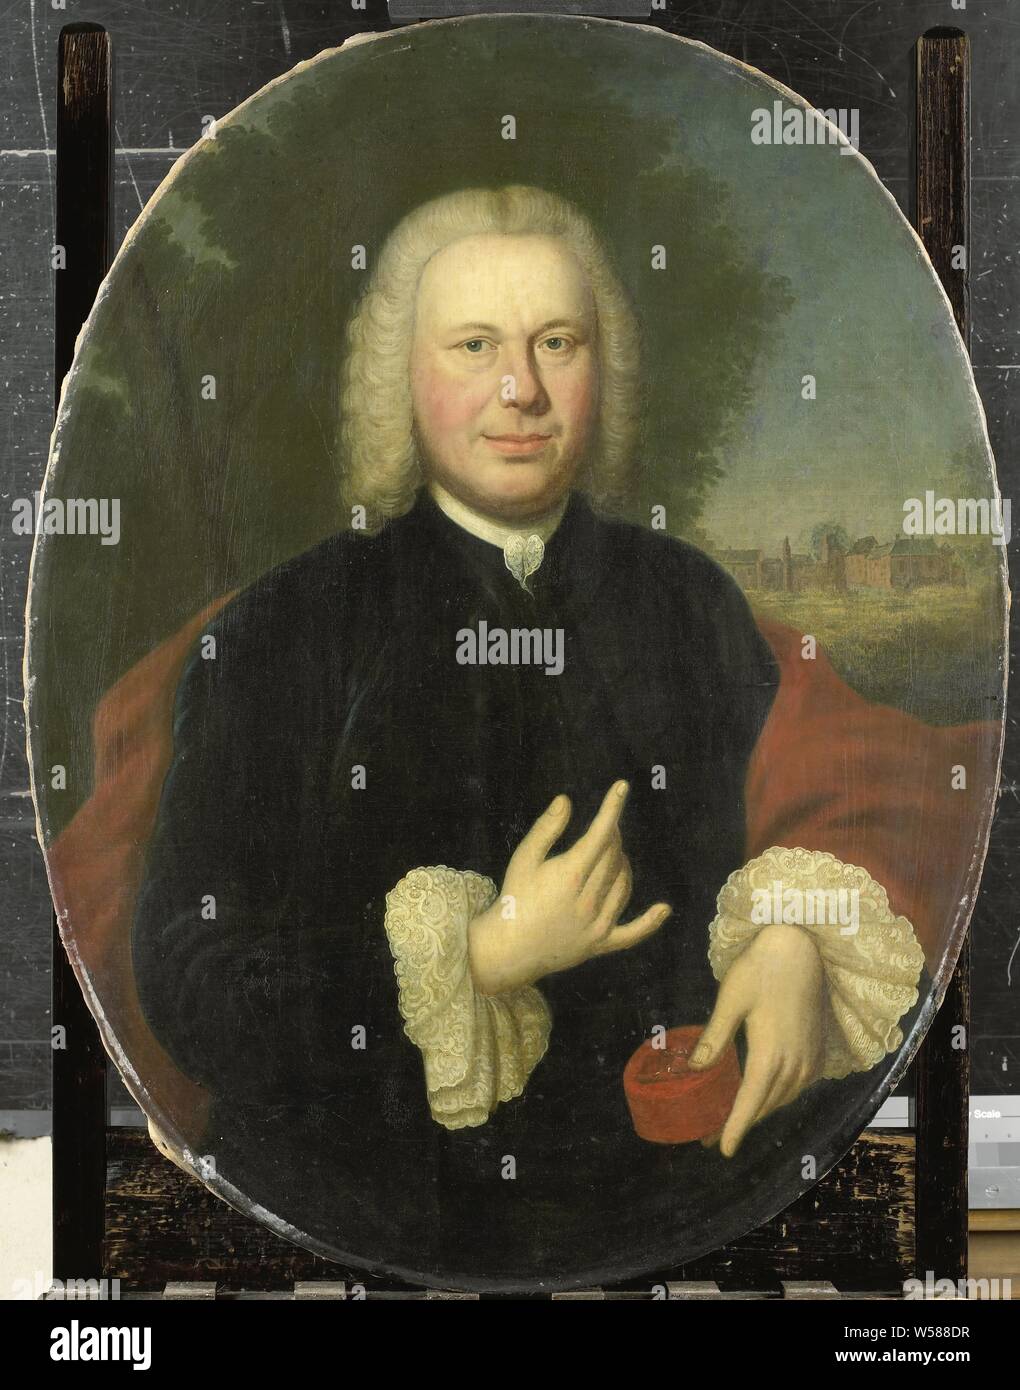 Diederik van Bleyswijk (1711-63), Baron of Eethen and Meeuwen, Lord of Babiloniienbroek, Burgomaster or Gorkum, Portrait of Diederik van Bleyswijk, freethinker of Eethen and Meeuwen, lord of Babiloniienbroek, mayor of Gorkum. Oval portrait, half-length, with a snuff box in the left hand, and a country retreat in the background. Diederik van Bleyswijk, Conrad Kuster, 1761, canvas, oil paint (paint), h 87.5 cm × w 67 cm d 5.5 cm Stock Photo